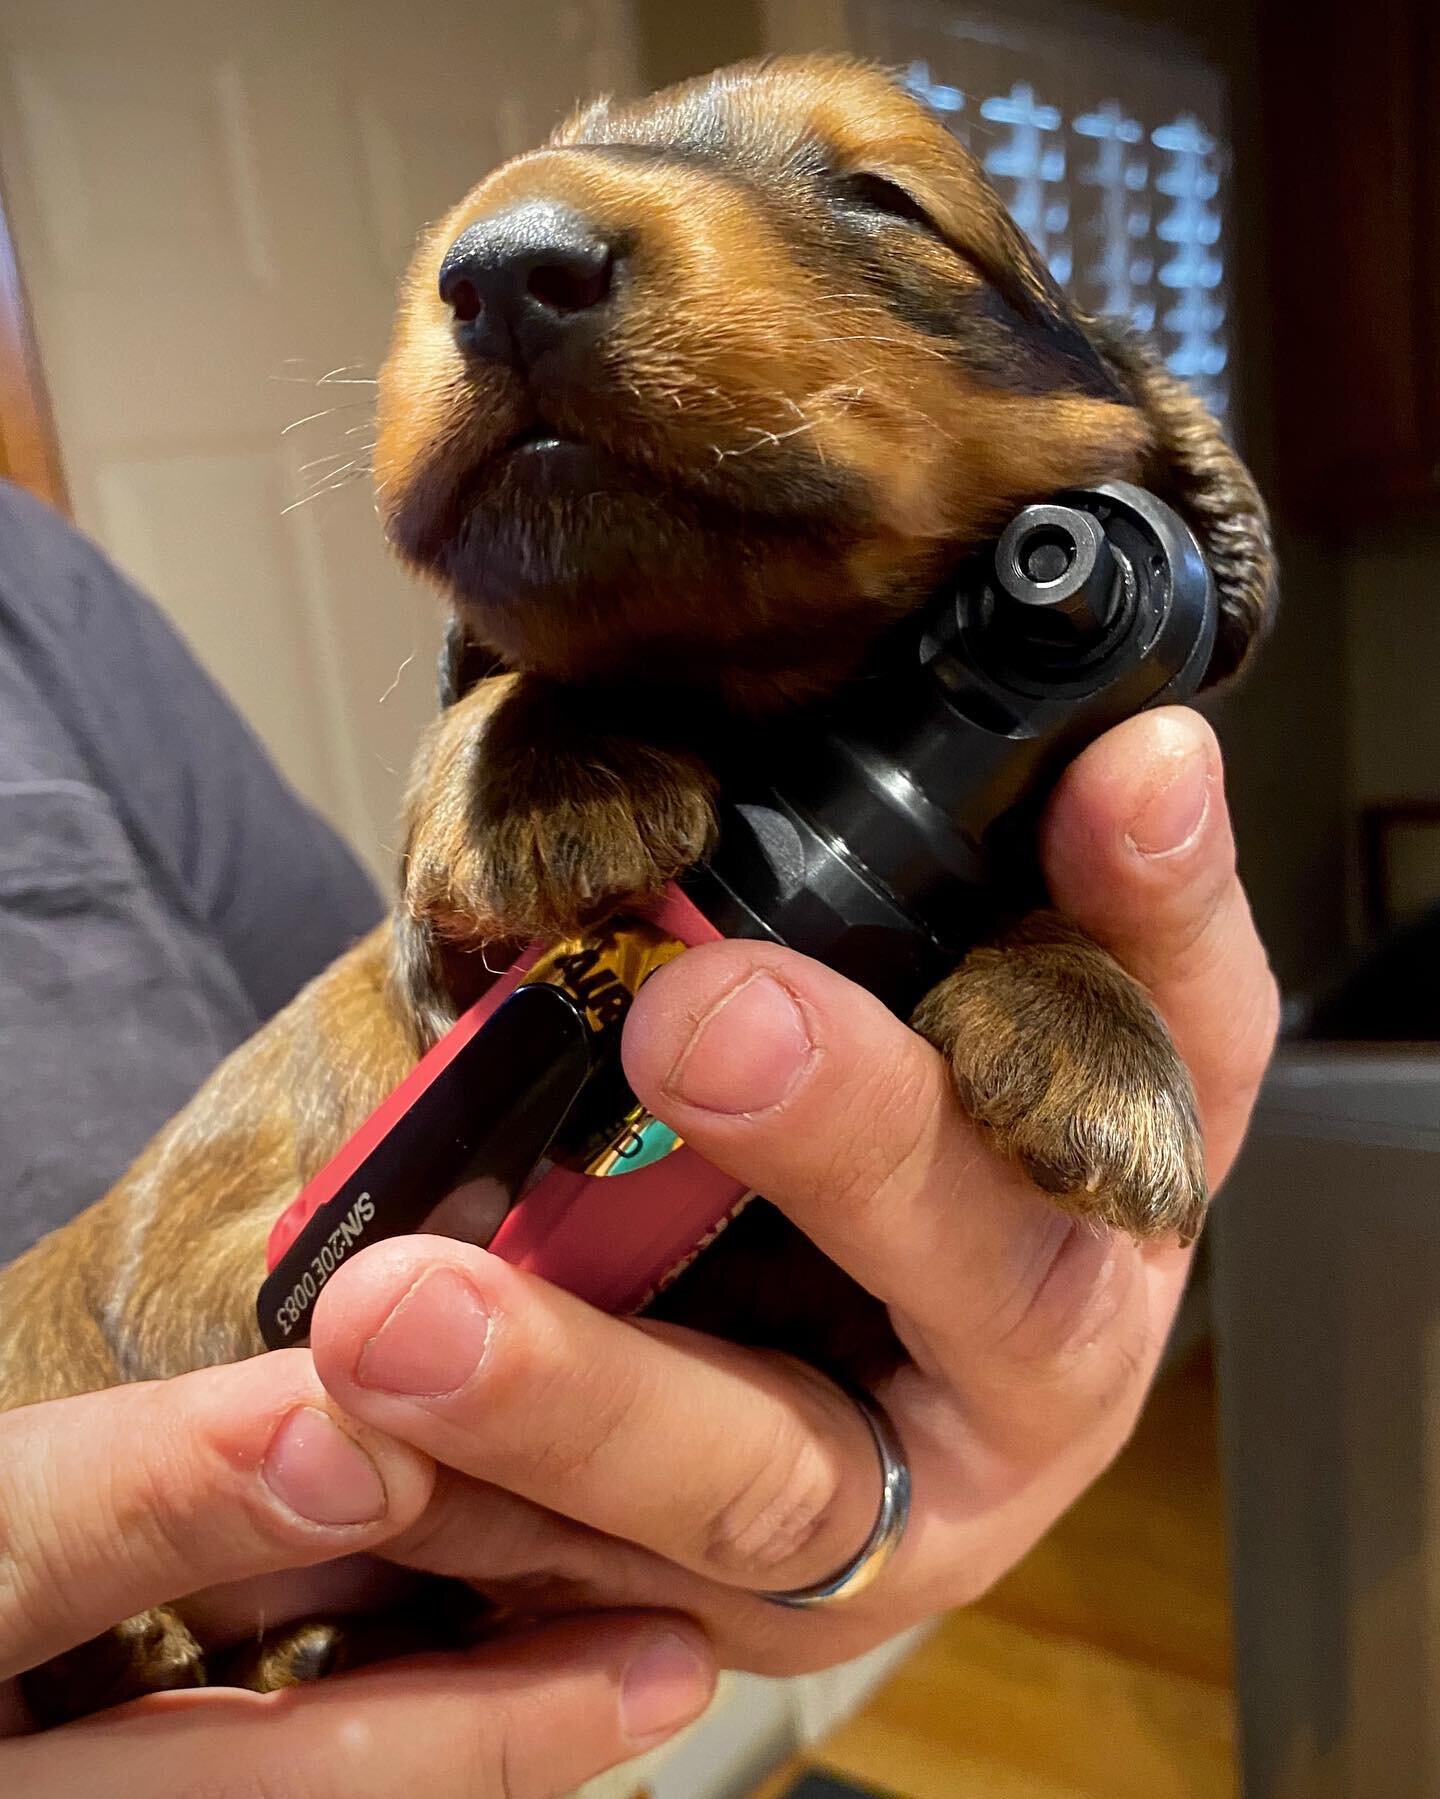 Chuncan Duncan giving the new wrench a snuggle.  He&rsquo;s ready for all the projects lined up!
#dachshundsofinstagram #attheminifarm #pramadakoradox #tooltime #sweetestpuppyever #duncanthelonghairdachshund